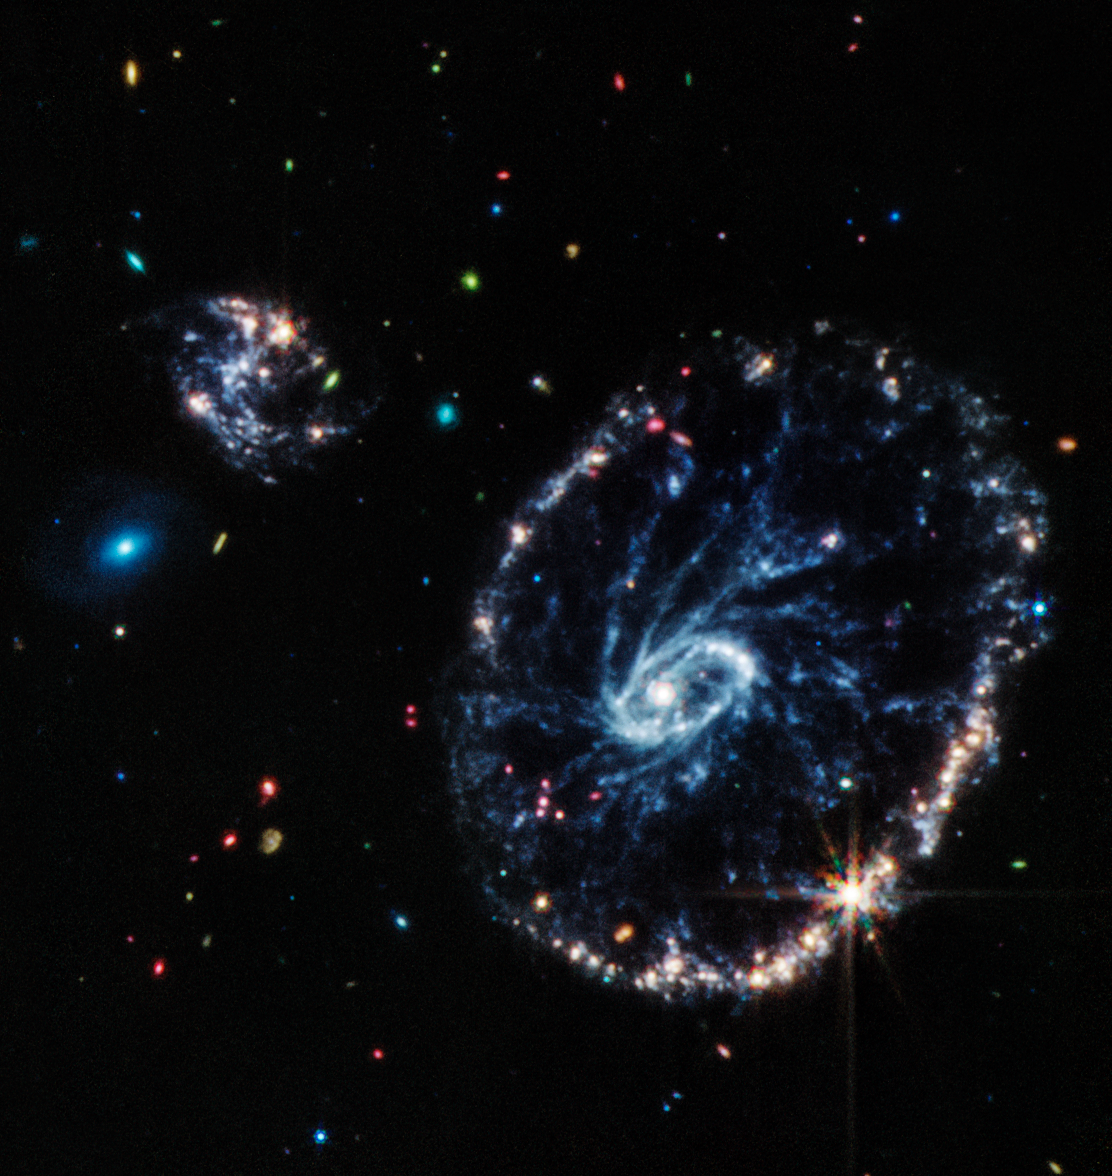 A large blue, speckled galaxy resembling a wheel with gold spots along the outer ring, a small, inner oval, with dusty blue in between. Two smaller galaxies, one a fuzzy blue spot and the other similar to the larger galaxy, all against a black background.